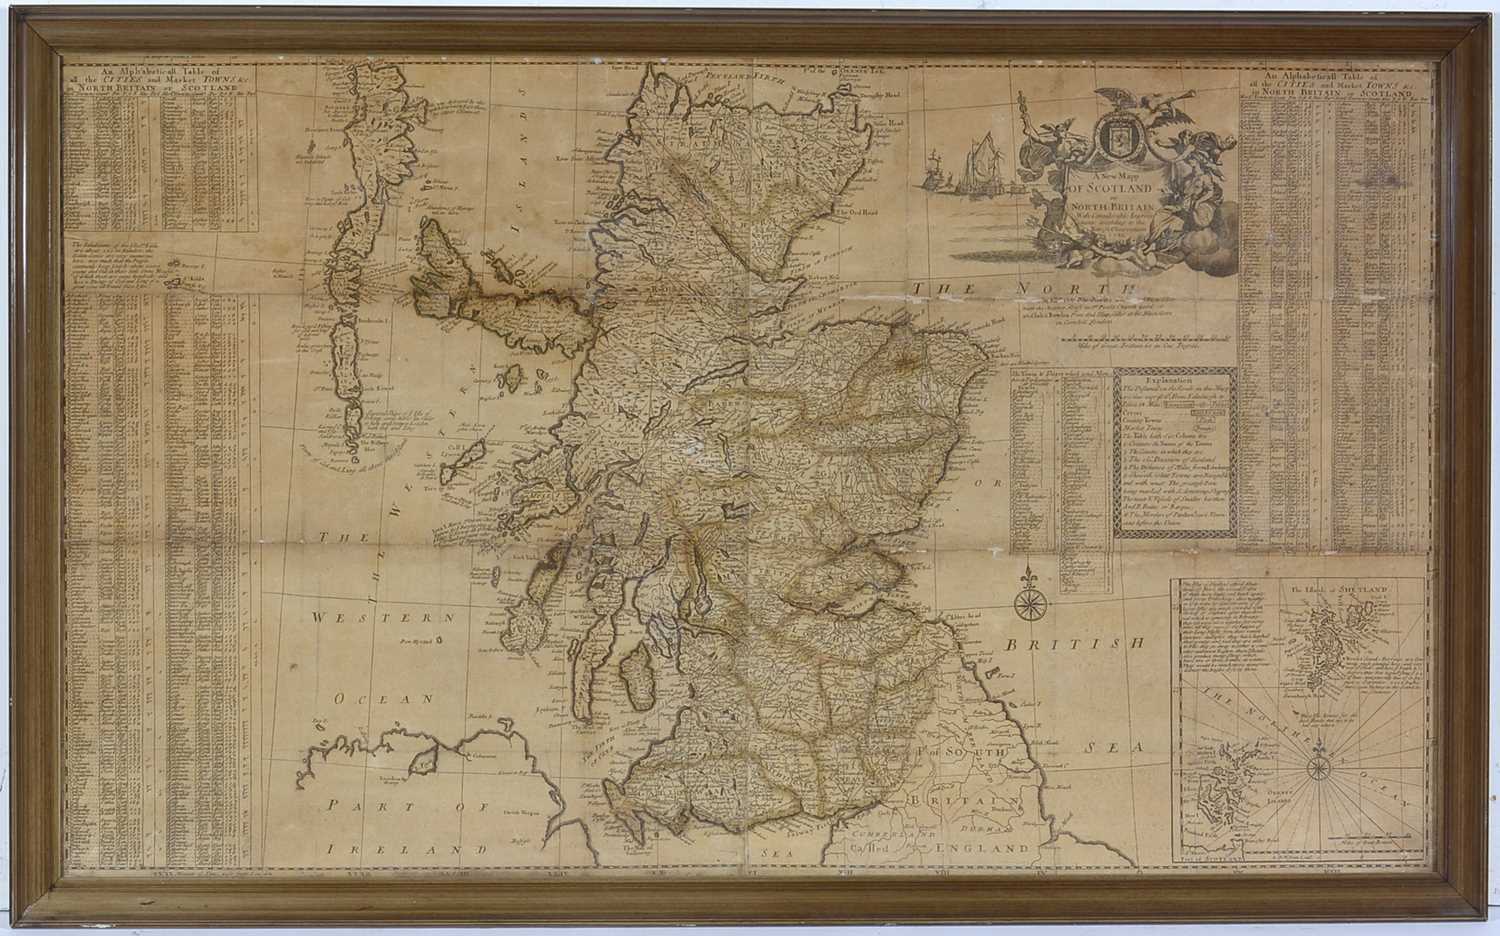 Lot 19 - Thomas Bowles - 18th Century map of Scotland, the North of England, and Ireland | engraving